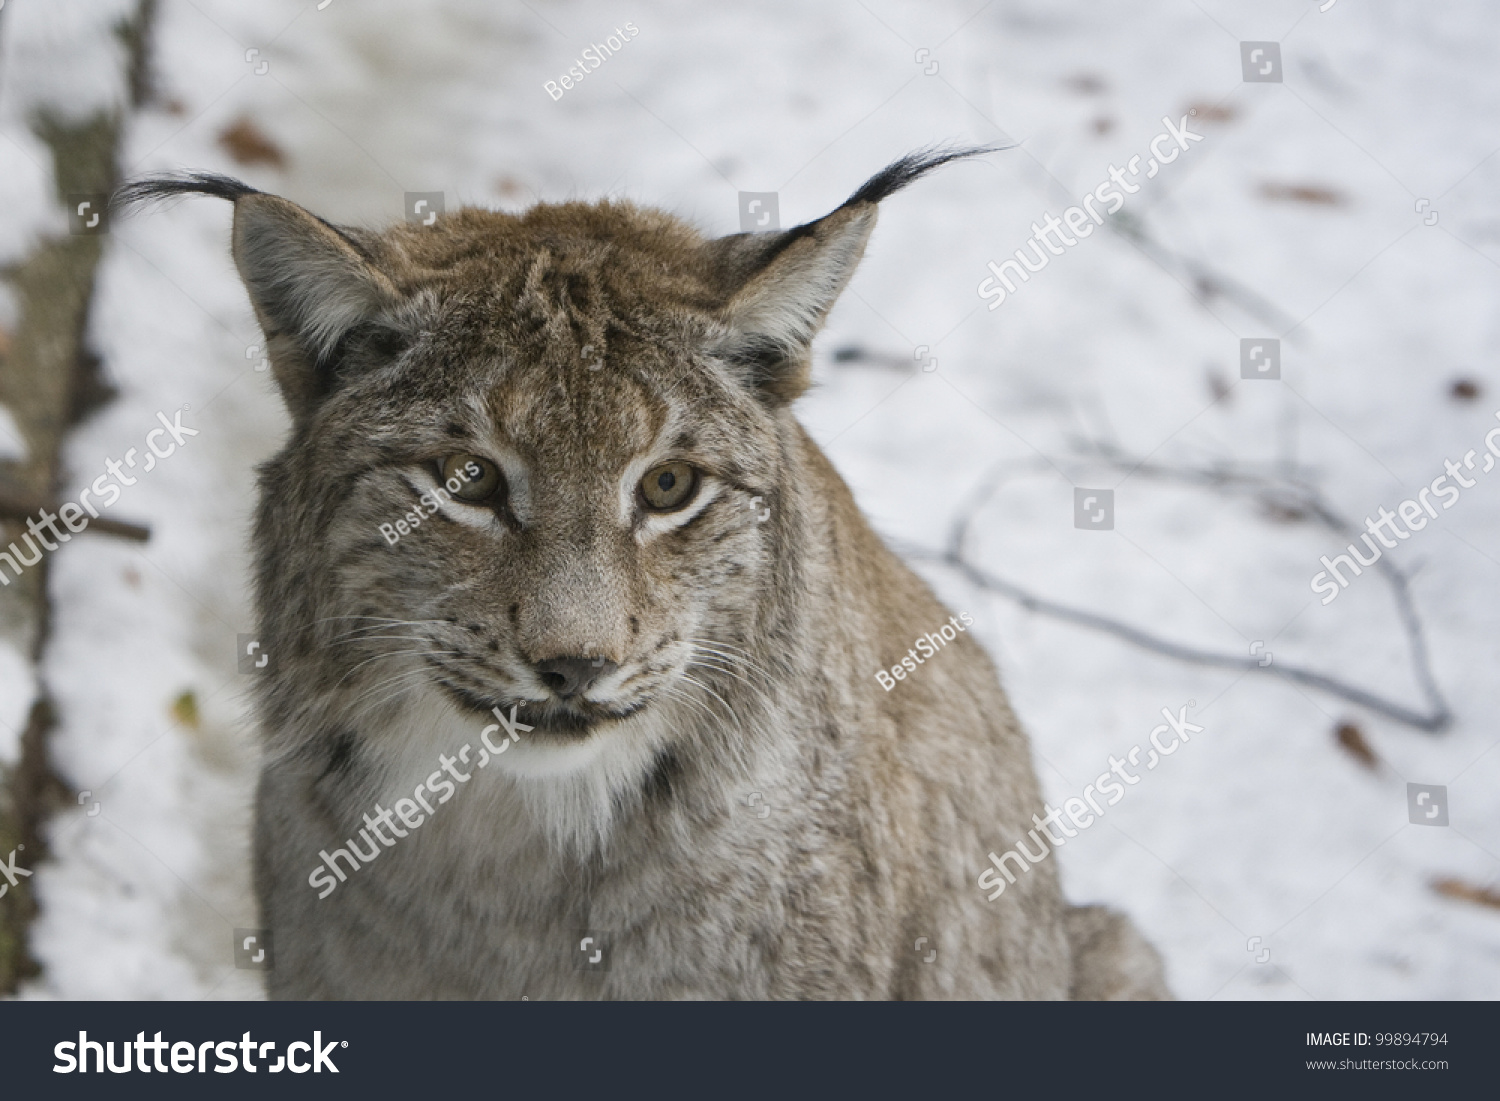 Old Male Lynx On The Snow Stock Photo 99894794 : Shutterstock